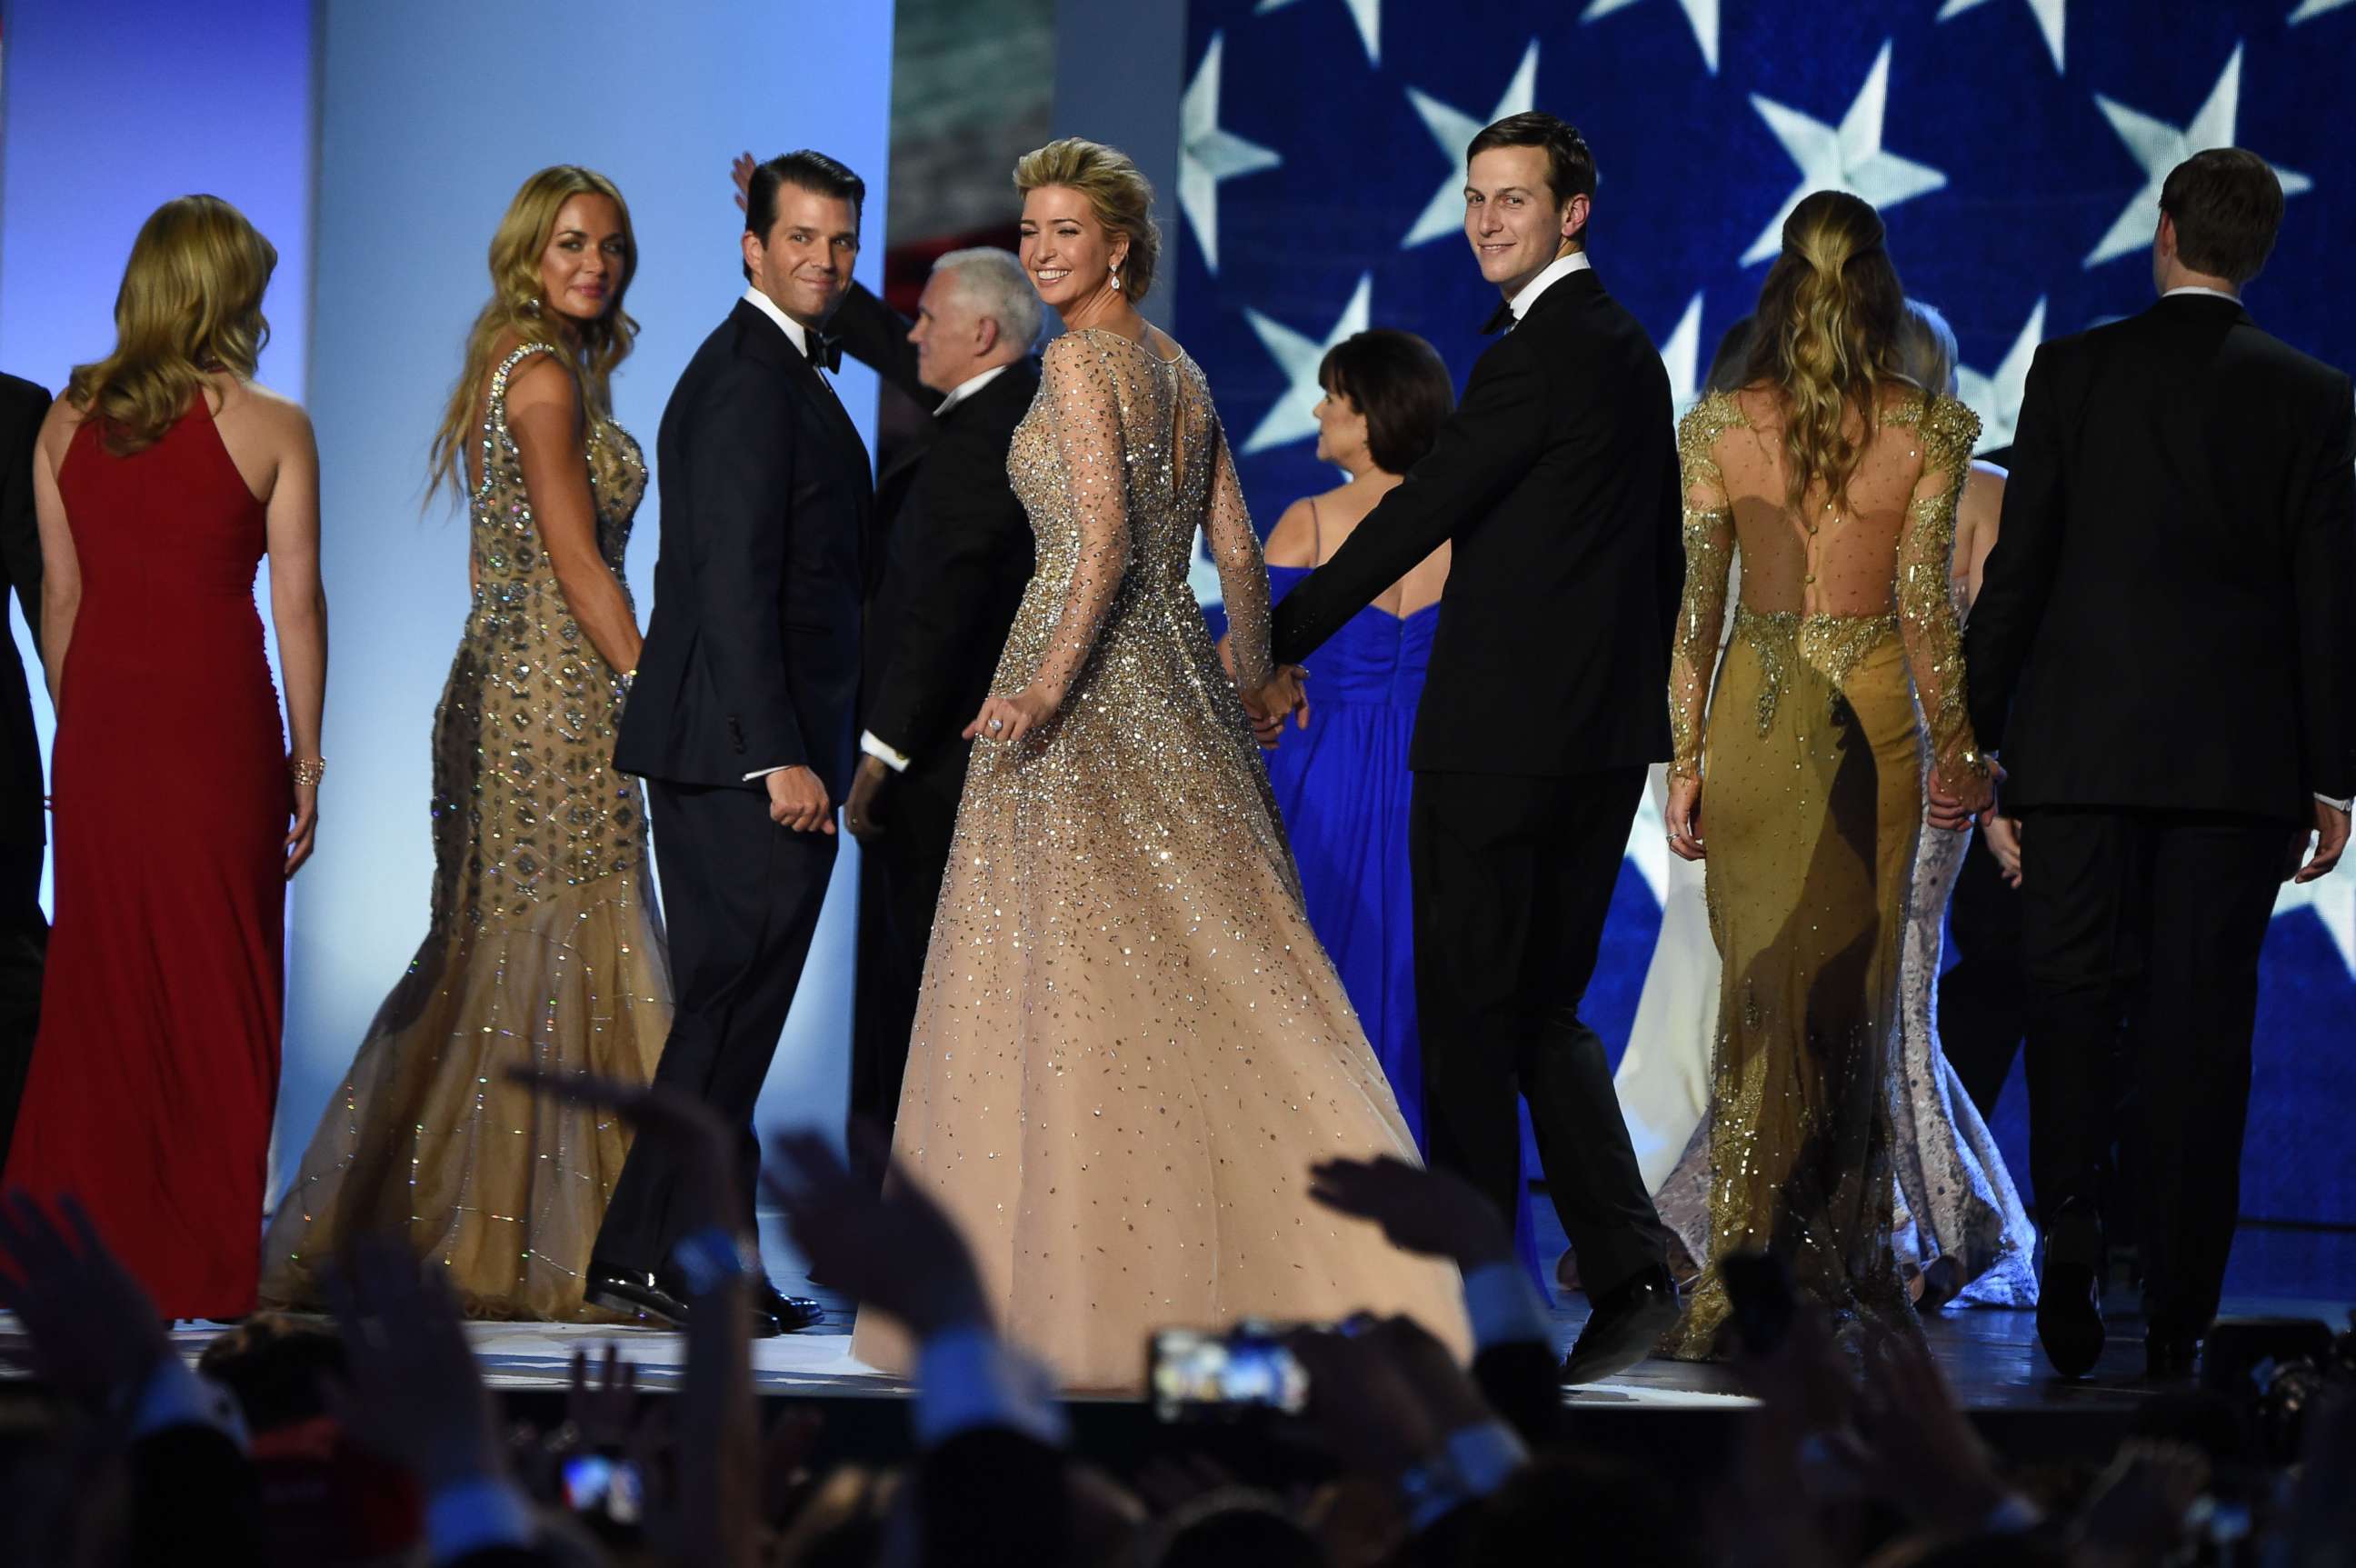 PHOTO: Vanessa and Donald Trump Jr, Ivanka Trump and Jared Kushner salute the crowd after dancing on stage during the Freedom ball at the Walter E. Washington Convention Center, Jan. 20, 2017, in Washington, D.C.